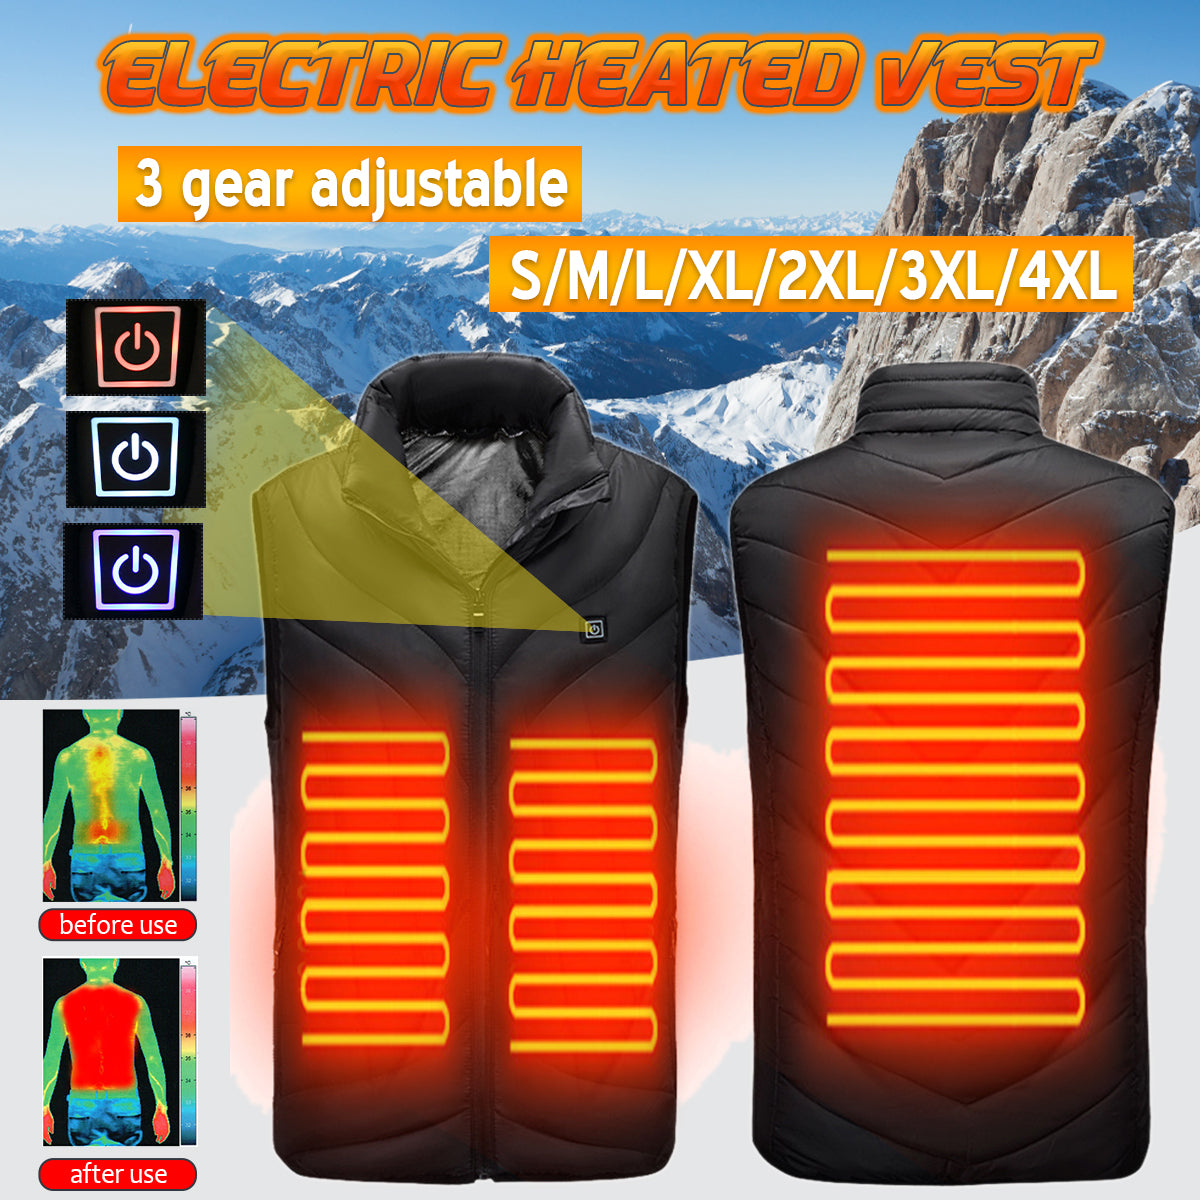 Olive Drab Red/Black 5V USB Heated Vest Men Winter Electrical Heated Sleeveless Jacket Outdoor Hiking